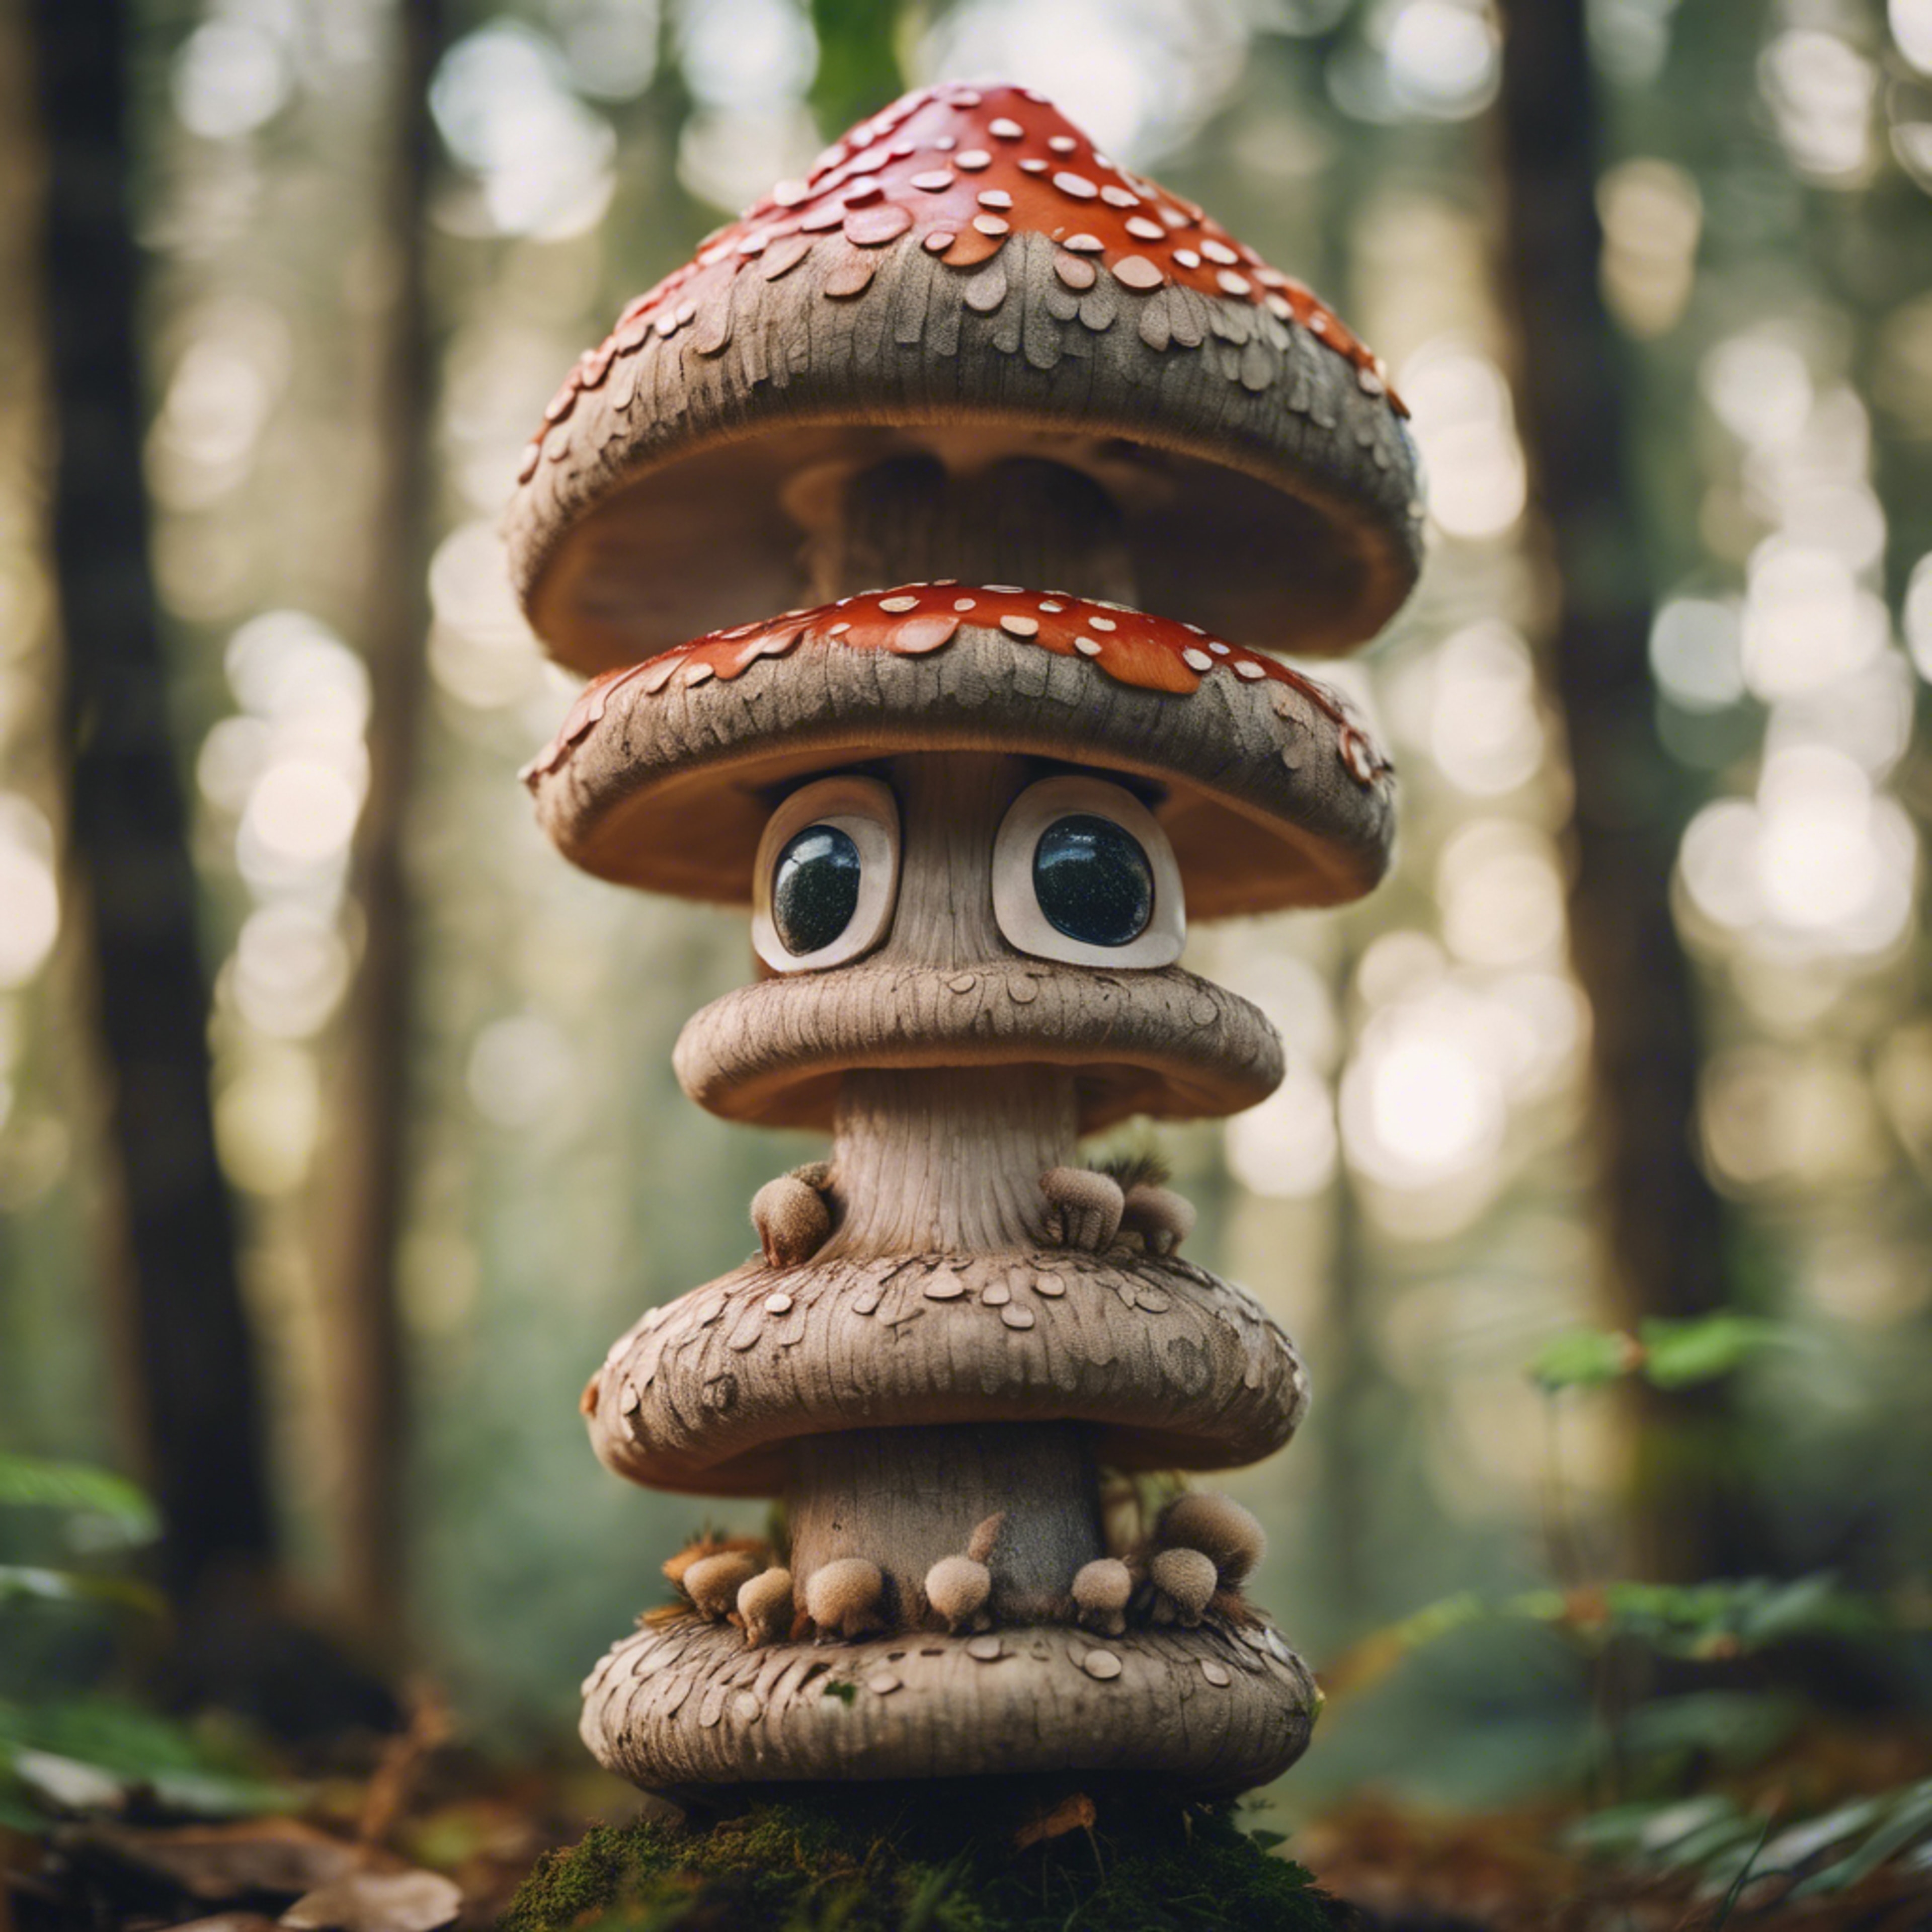 A couple of cute Mushrooms playfully stacking up to form a totem pole in a whimsical forest. ផ្ទាំង​រូបភាព[433a45e1c3f24476b32f]